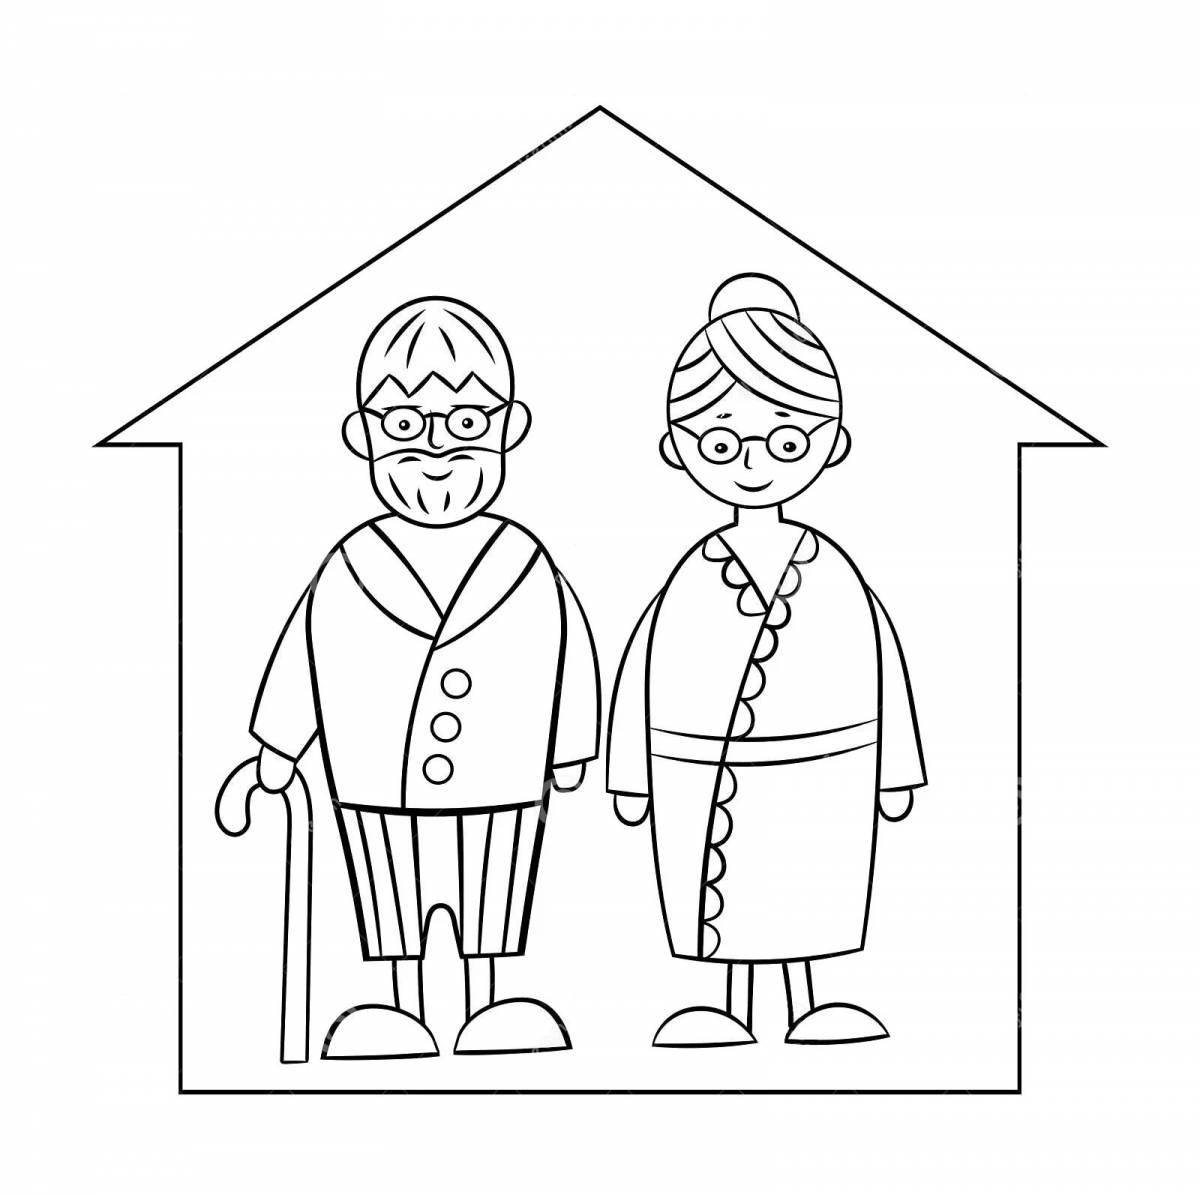 Shining grandparents coloring pages for kids